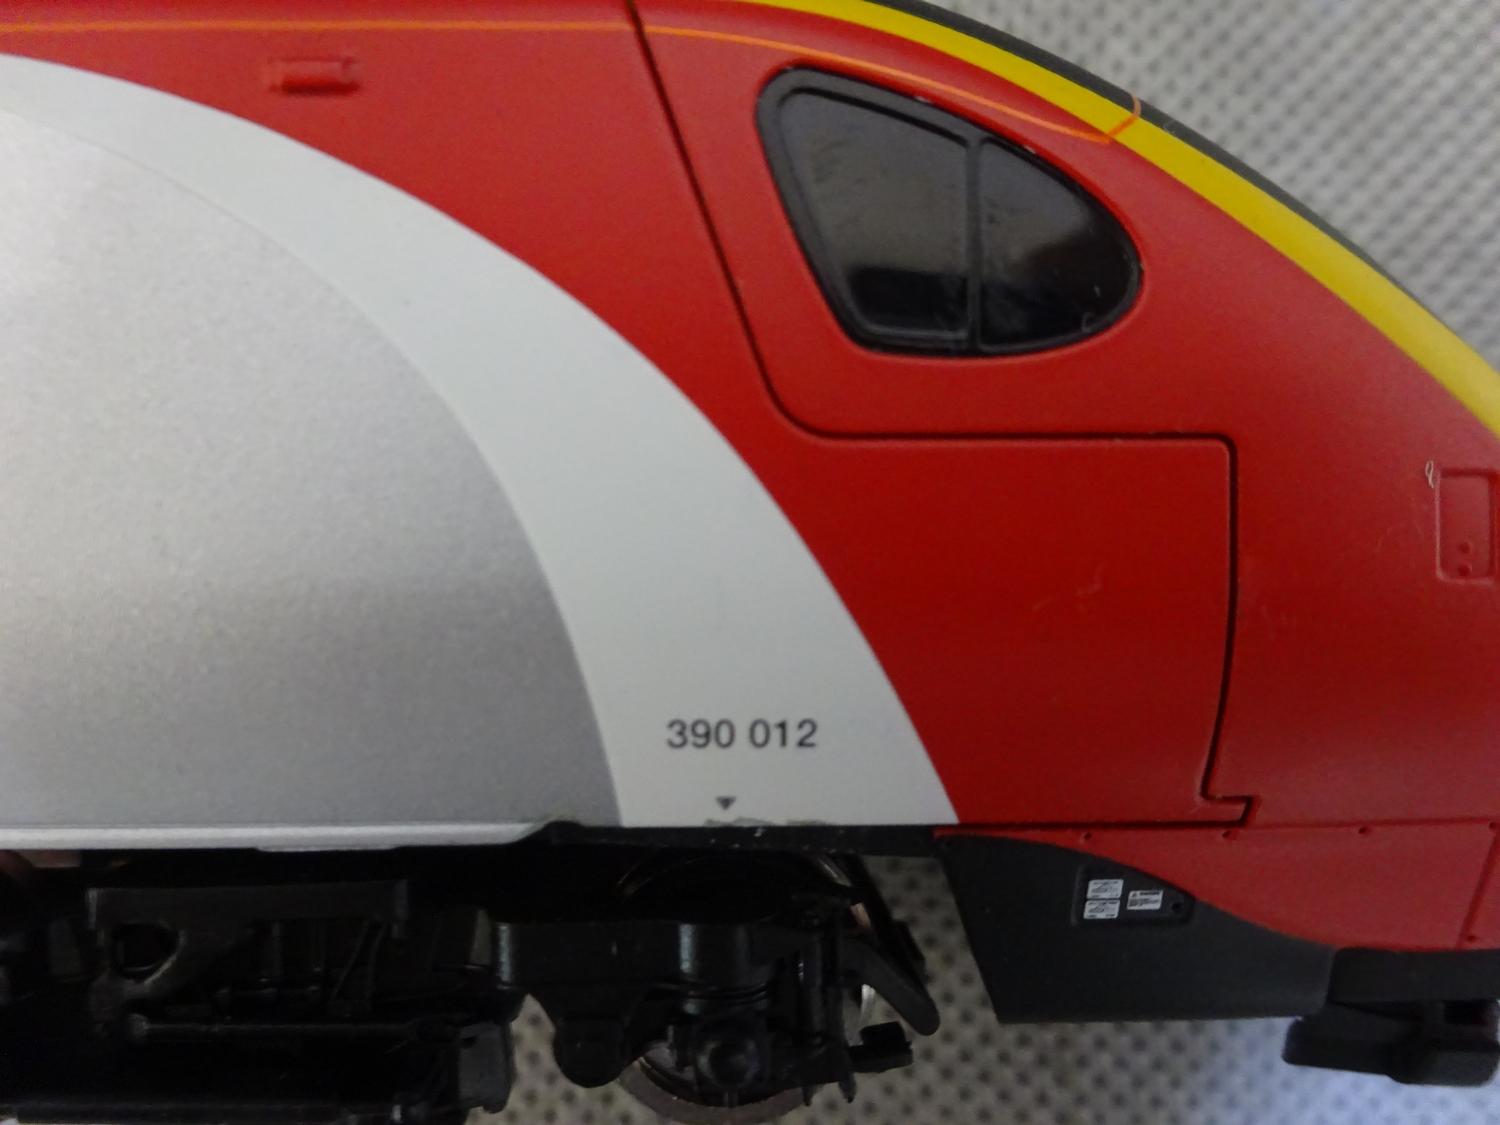 Hornby Virgin Trains Pendolino 390 DCC FITTED Unit of 4 & smaller Hornby train/carriage - Image 2 of 2